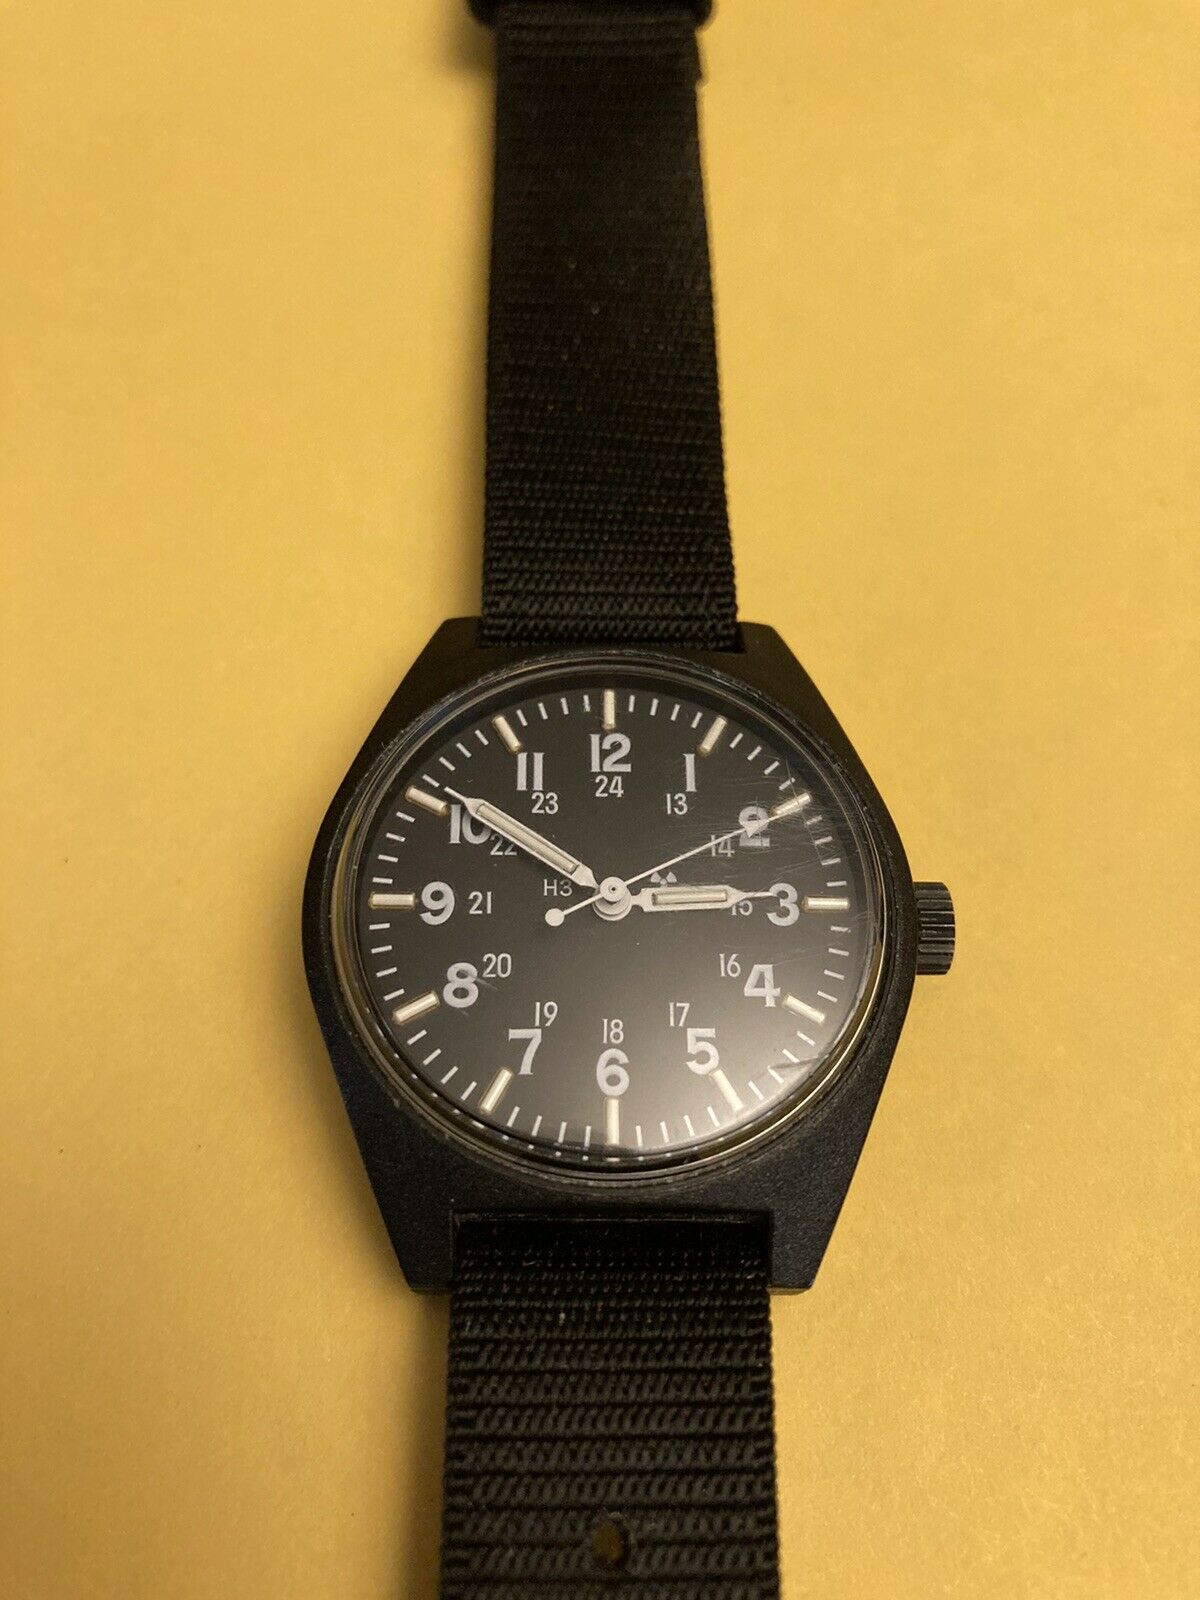 General Purpose Us Military Issue H3 Watch